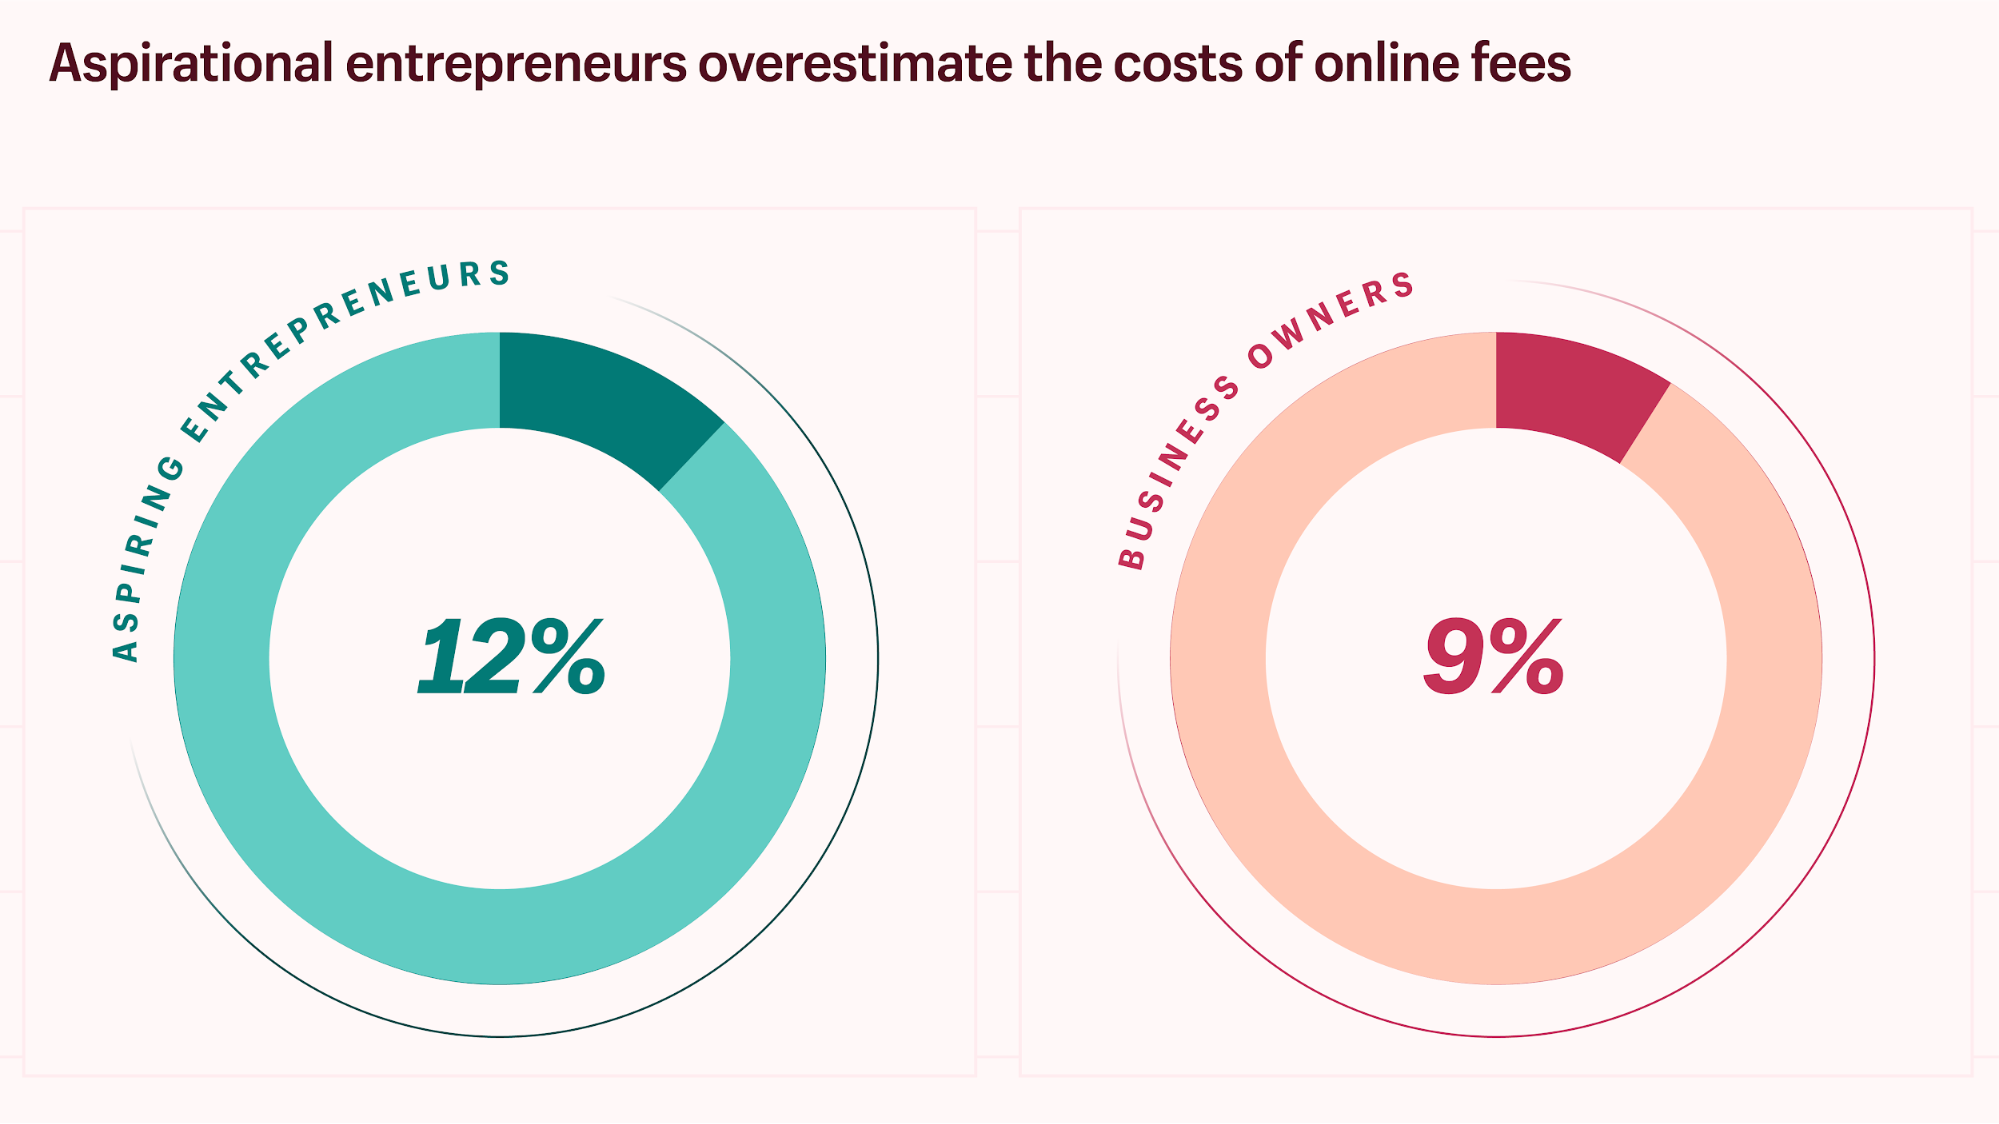 Percentage of business owners who overestimate their online costs.